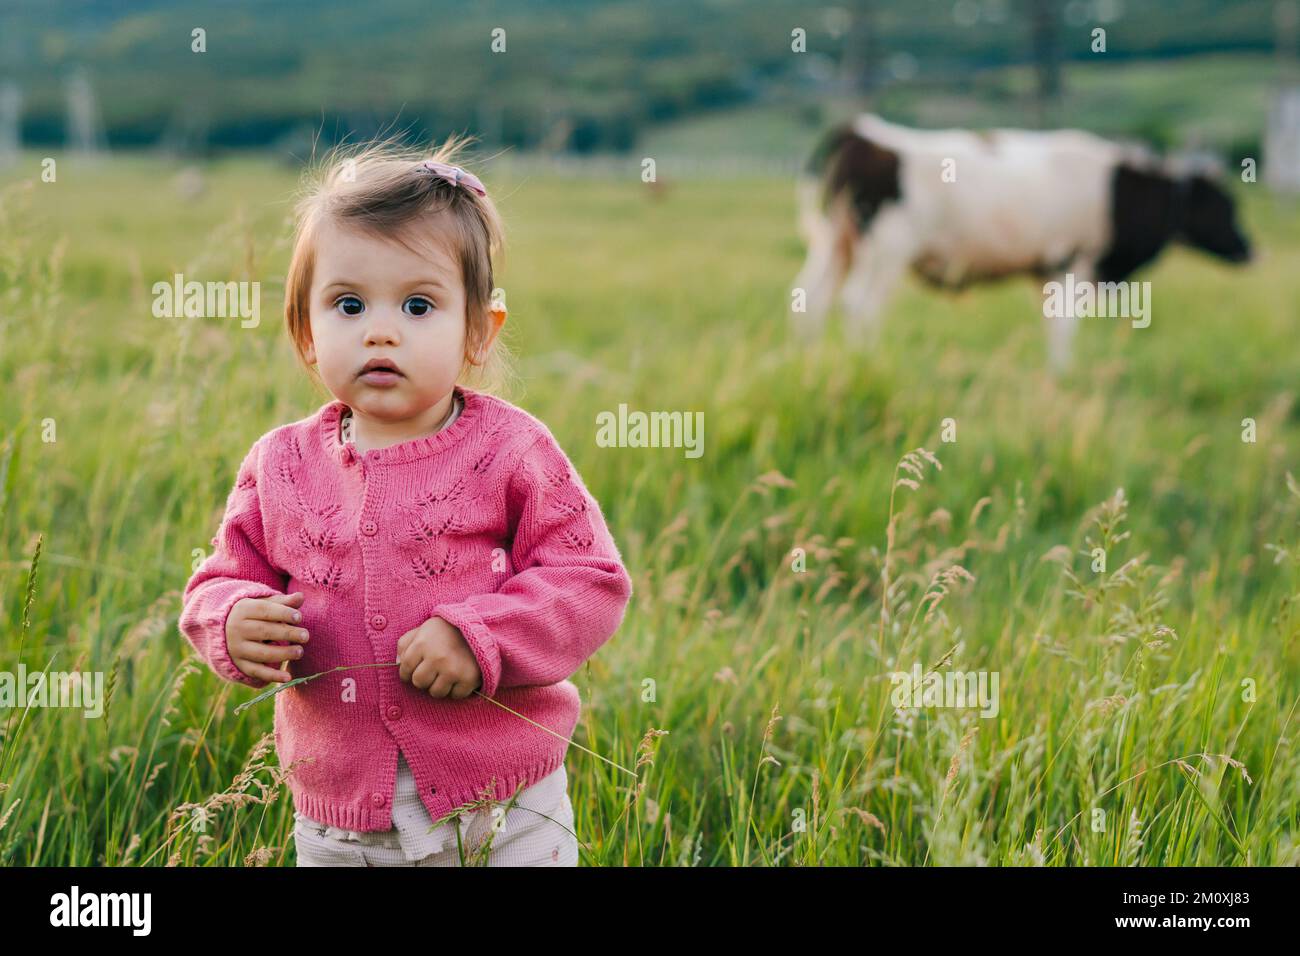 Caucasian baby girl standing on grassy field looking curiously at the camera. Copy space. Kid exploring nature. Stock Photo